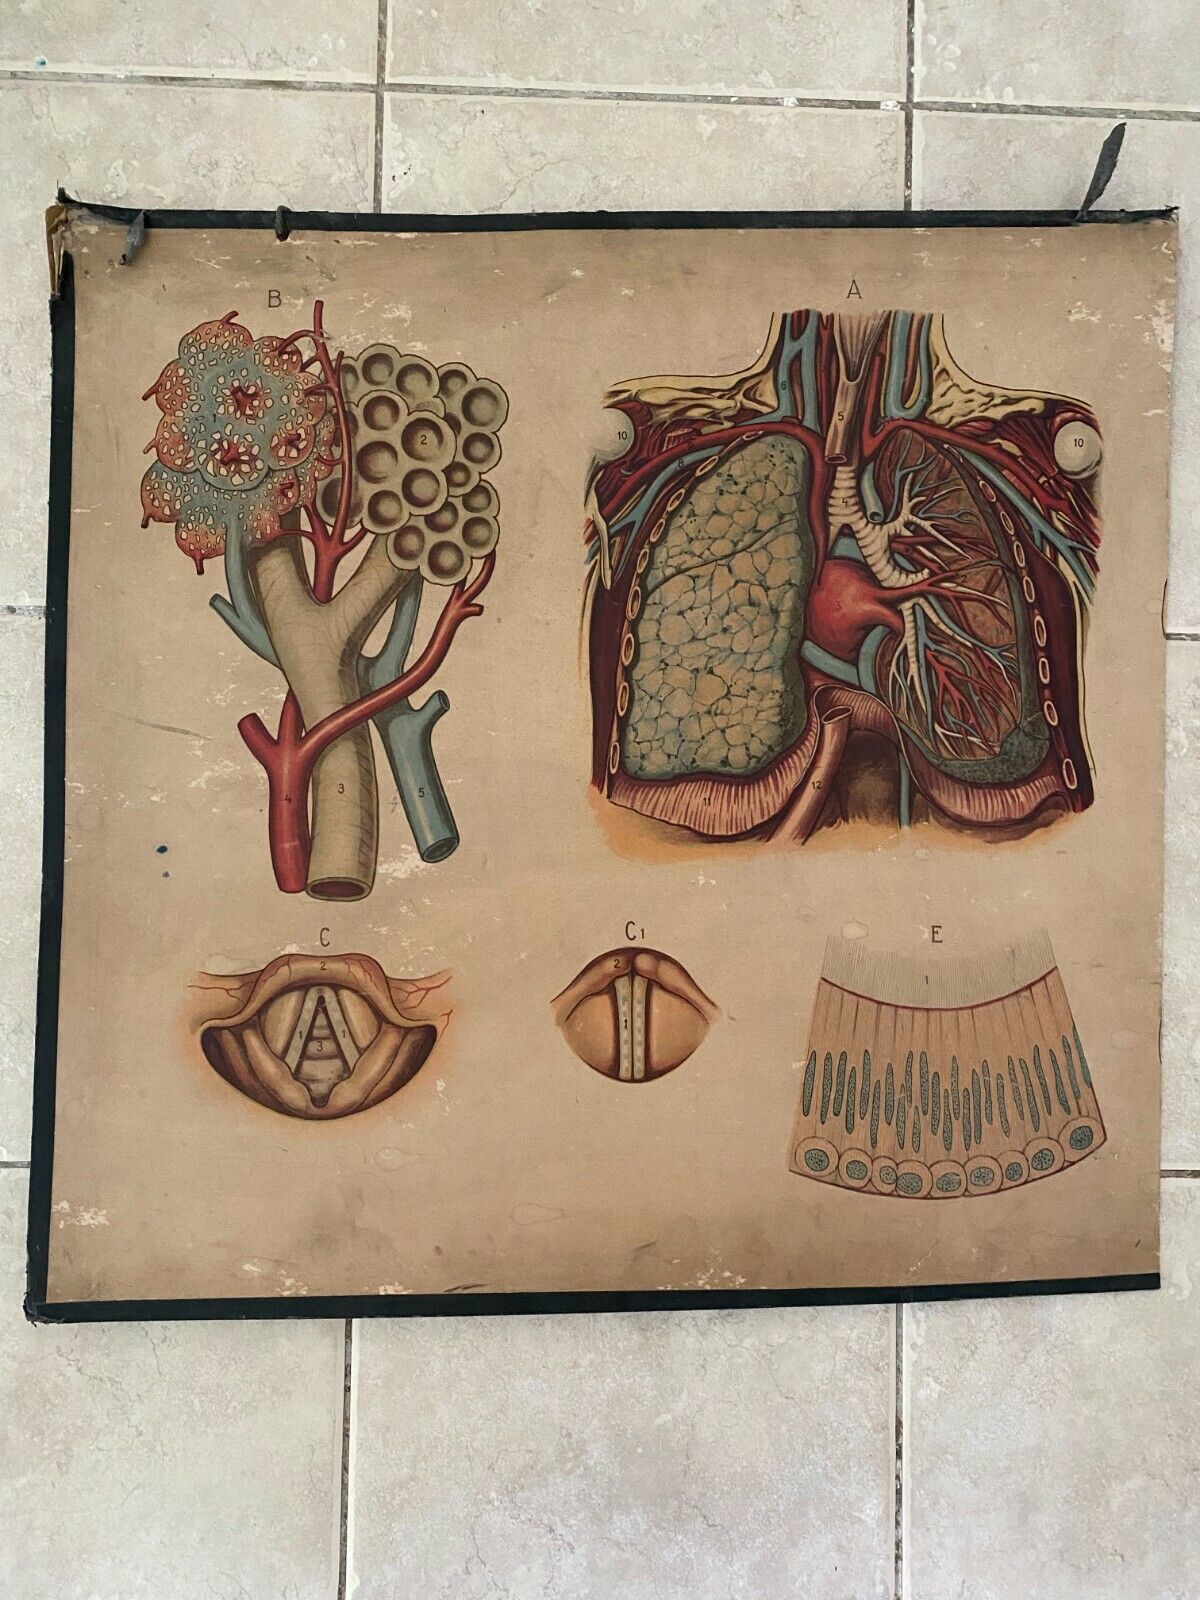 Original medical pull down school chart of Lungs